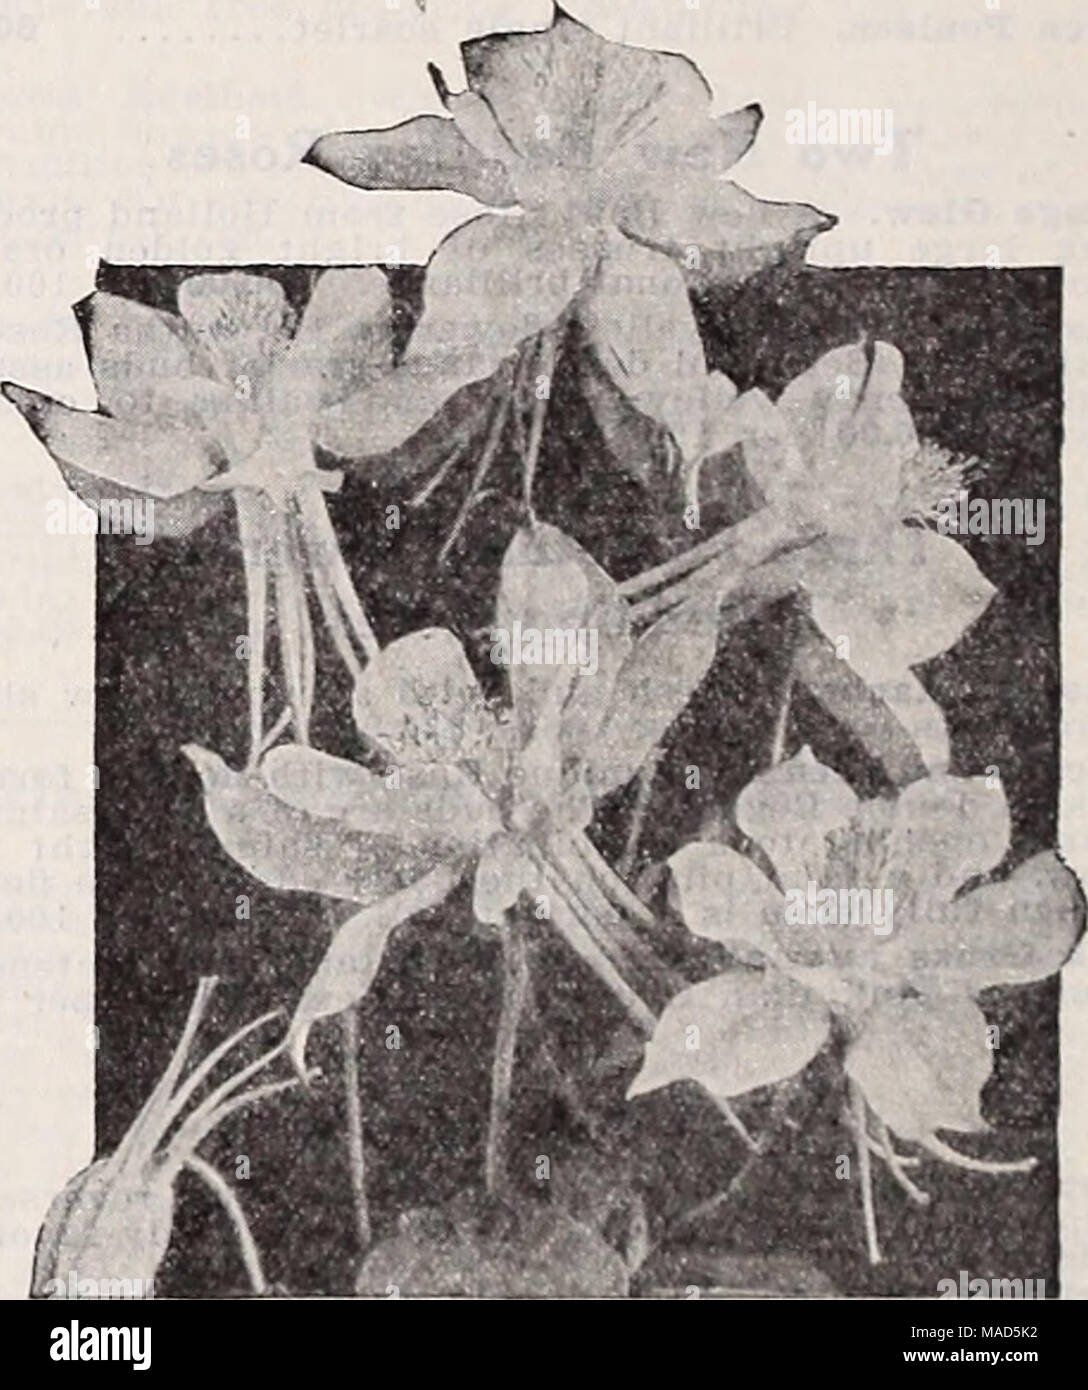 . Dreer's wholesale catalog for florists : winter spring summer 1937 . Dreer's Long-Spurred Aquilegia or Columbine Aquilegia—Columbine Per doz. Per 100 Canadensis. Our native red and yellow $1 50 $10 00 Chrysantha. Bright yellow, long spurred 1 50 10 00 —alba. Long-spurred white 1 50 10 00 Coerulea,Crimson Star (New). Brilliant blood crimson with conspicuous white corolla 2 50 15 00 Breer's Long Spurred Hybrids 1 50 10 00 — Itong Spurred Fink 1 50 10 00 Flabellata nana alba. Dwarf white 1 50 10 00 Helenas. Effective rich blue 1 50 10 00 58 Customer pays transportation ohargres on plants. Stock Photo